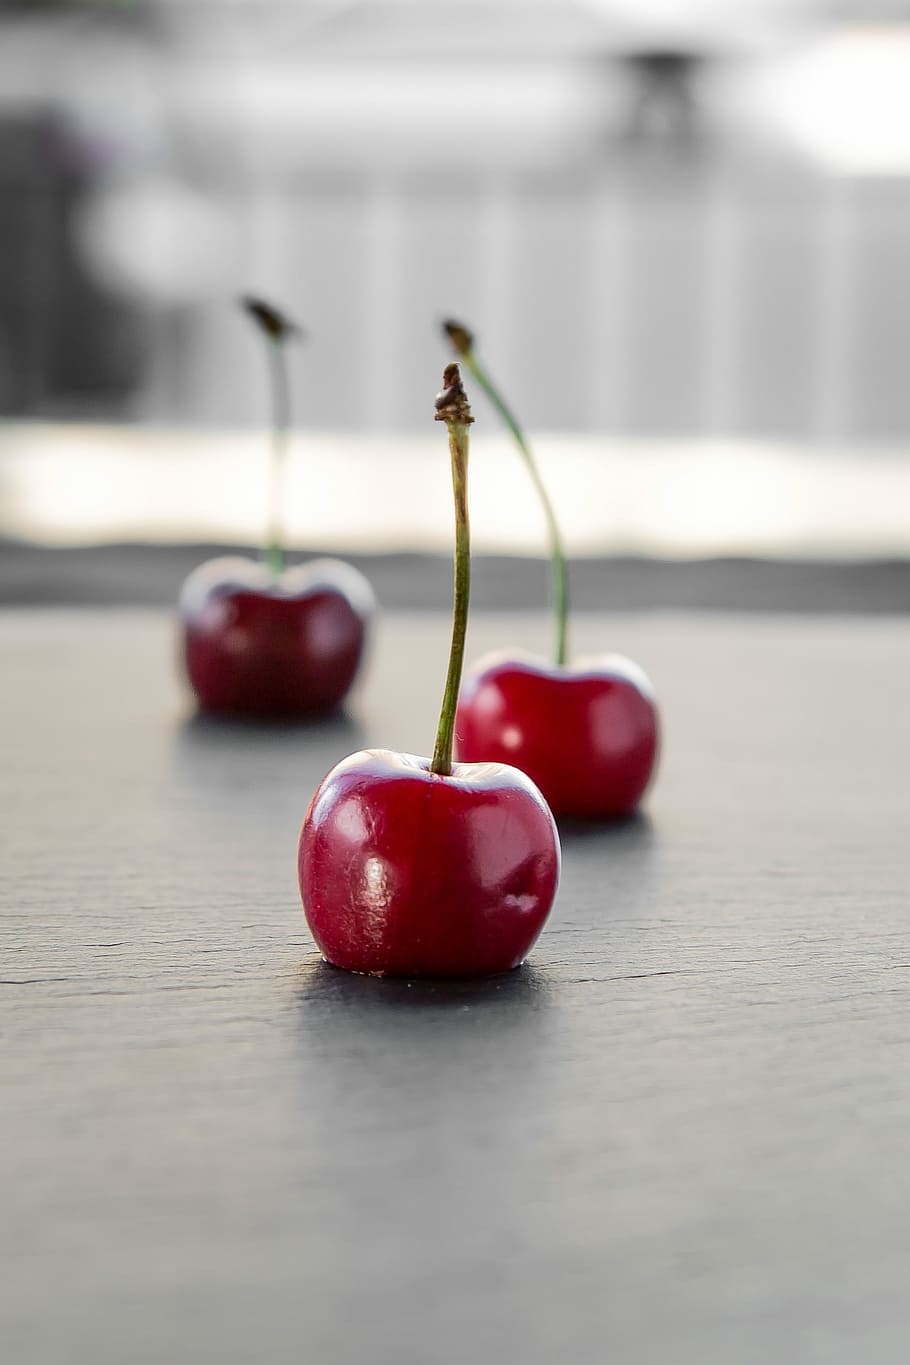 cheries, red, food, freshness, fruit, ripe, cherry, organic, healthy Eating, close-up